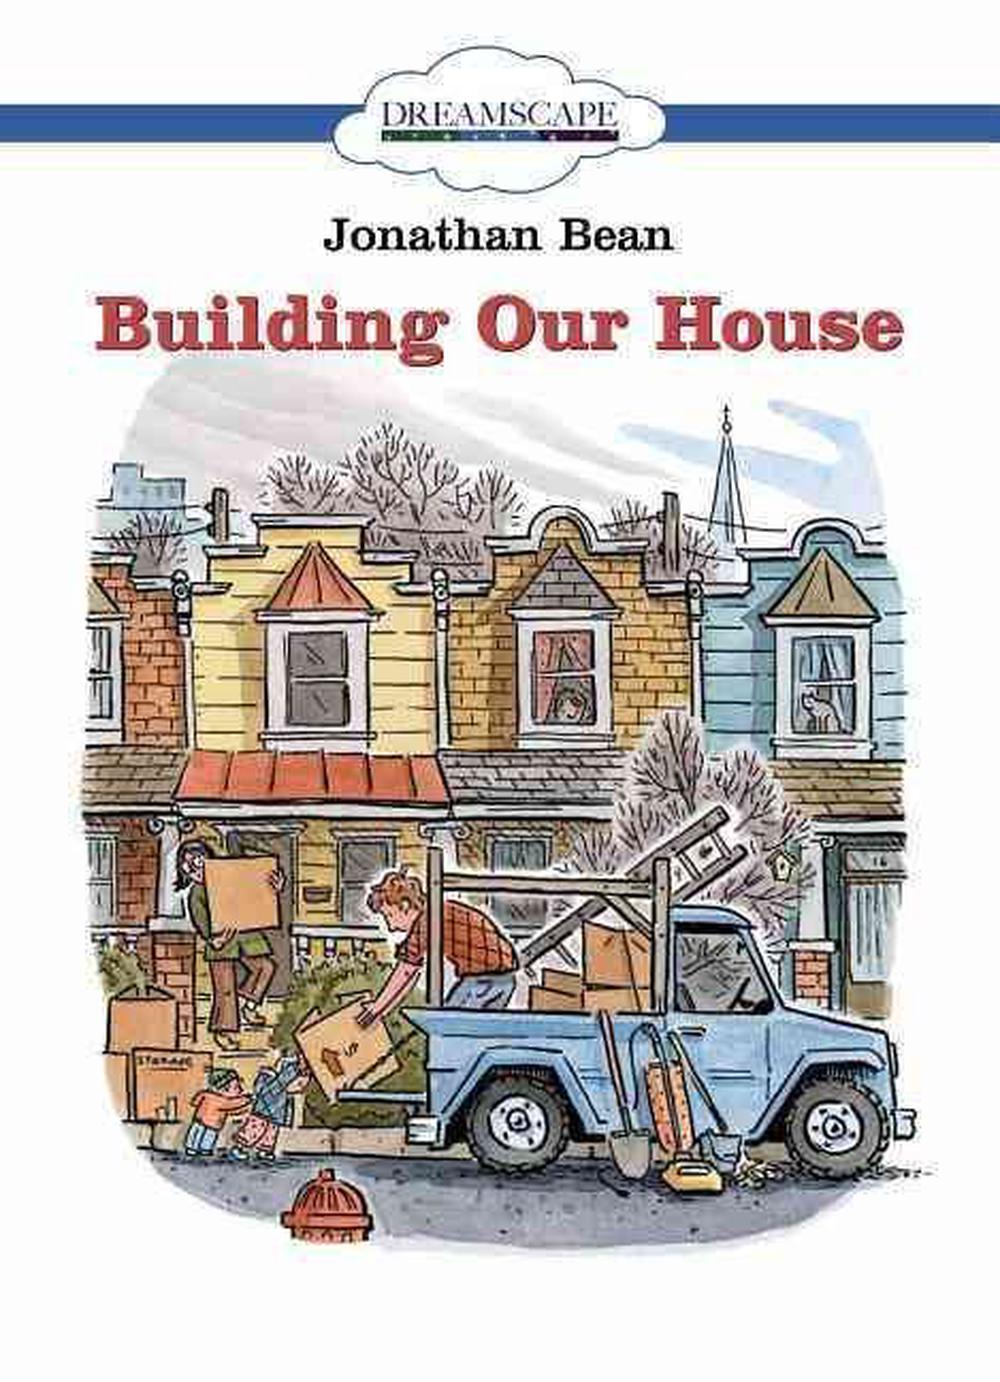 Building Our House by Jonathan Bean